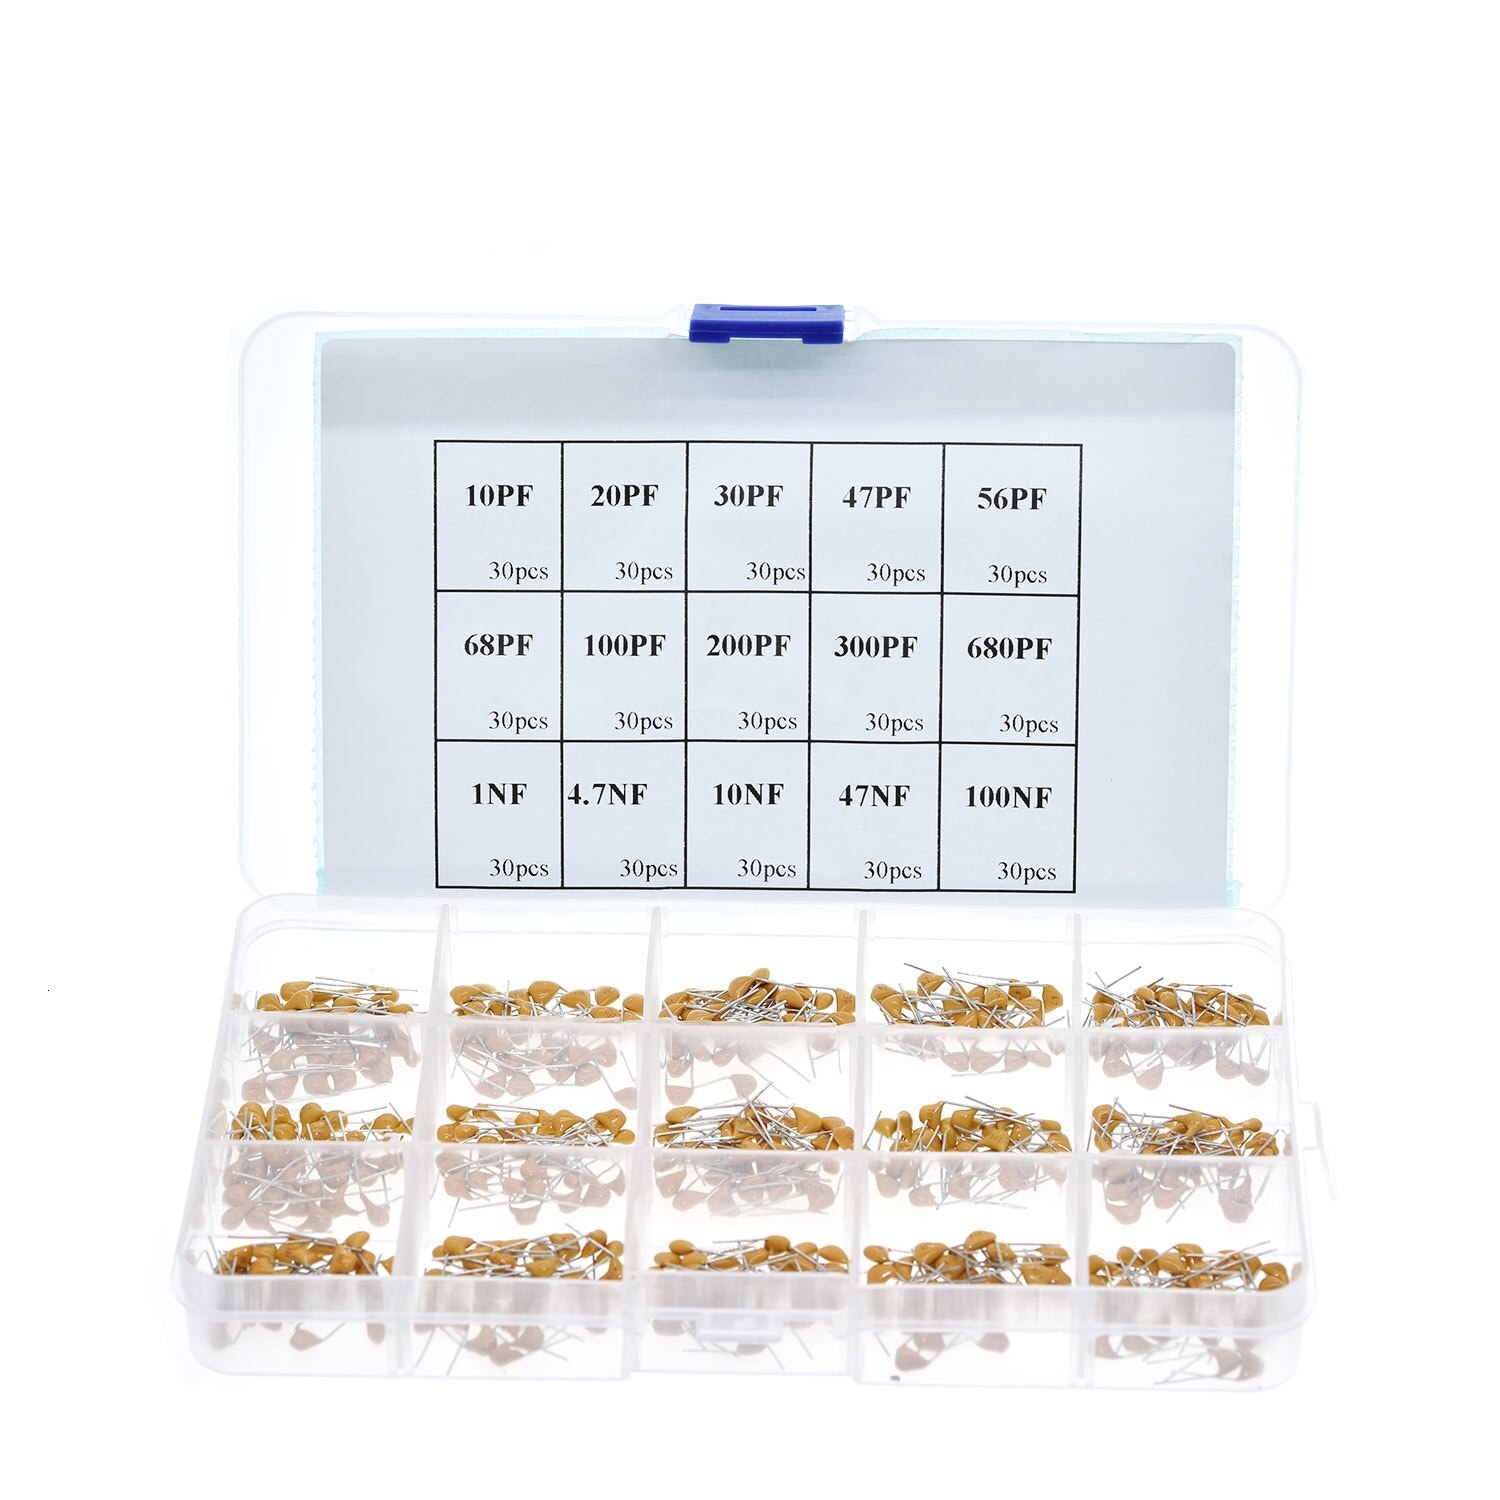 450pcs 15 Value Ceramic Capacitor Set 50v Multi-layer Assortment Box 10pf To 100nf Electronic Components Capacitor Kit 024